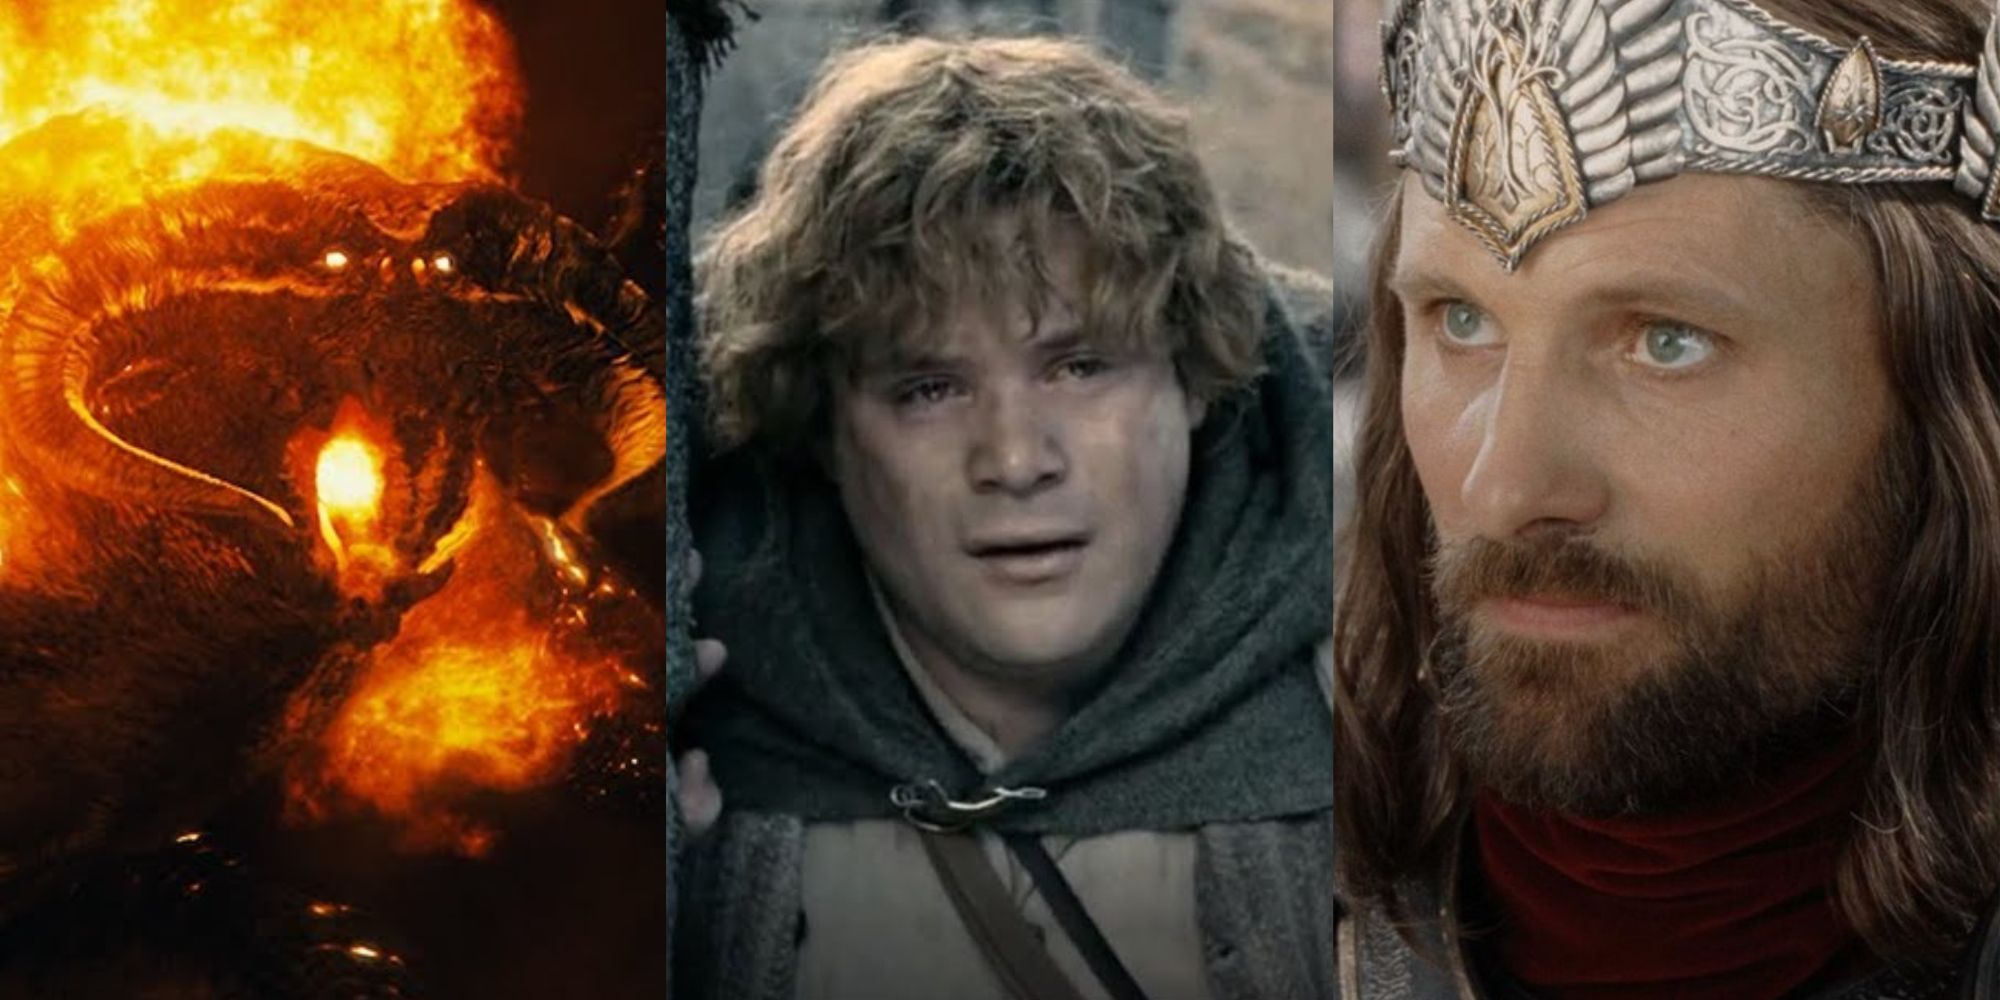 Split image of the Balrog, Sam and Aragorn from the Lord of the Rings movies